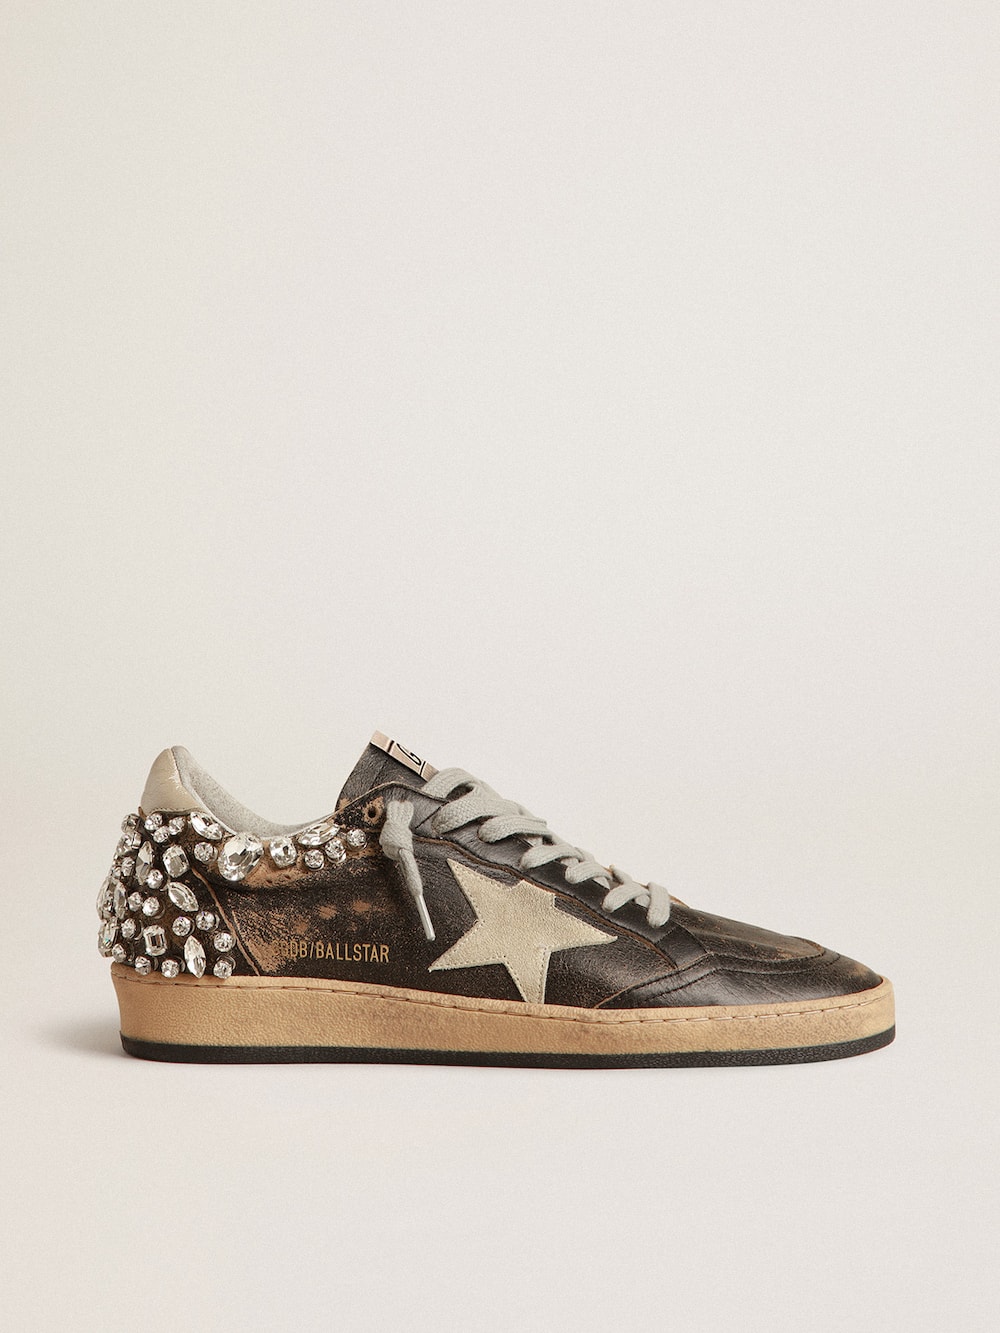 Golden Goose - Ball Star in black leather with Swarovski crystal decoration in 